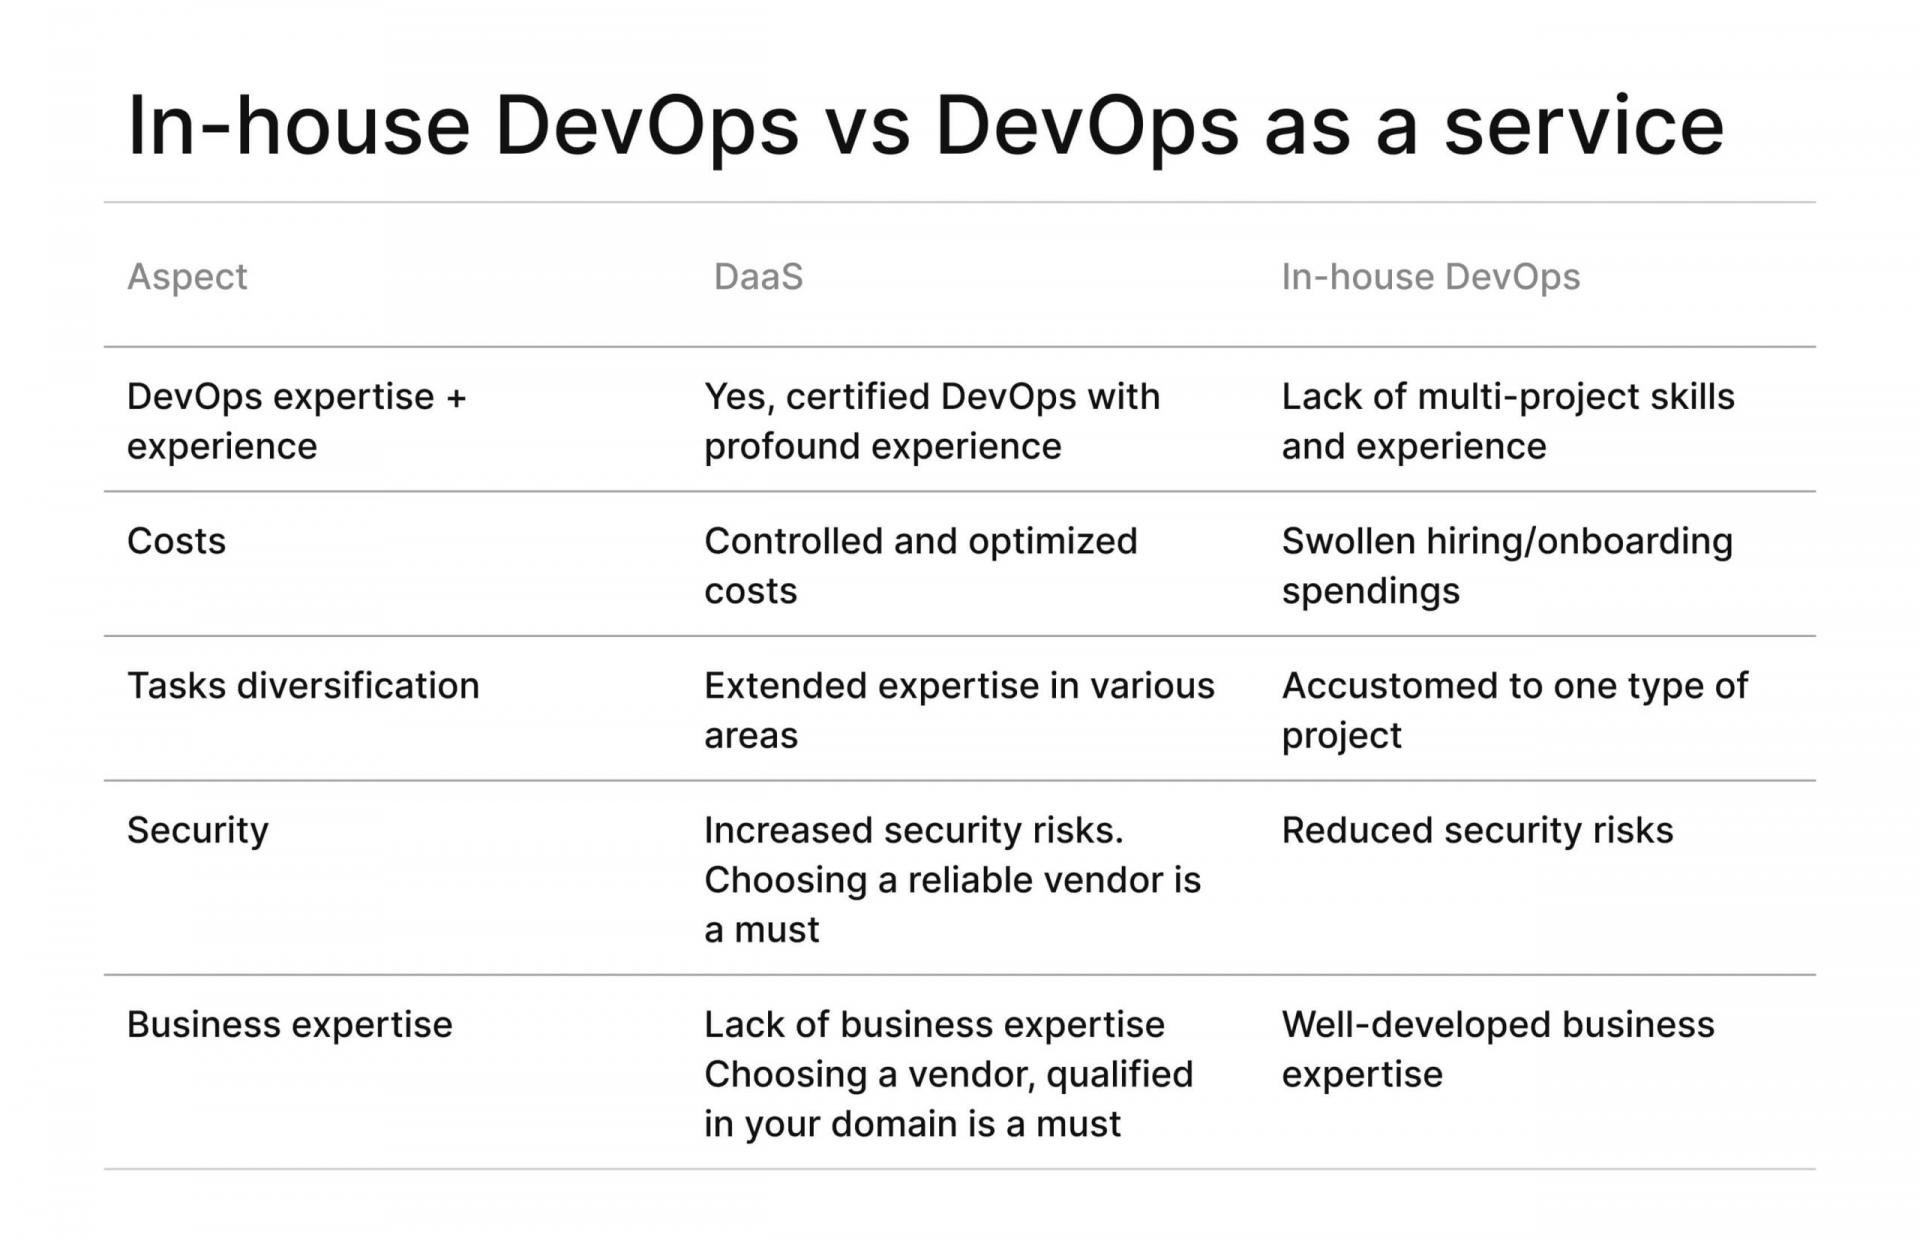 In-house DevOps or DevOps as a Service: What is Best for Your Business? Image 2